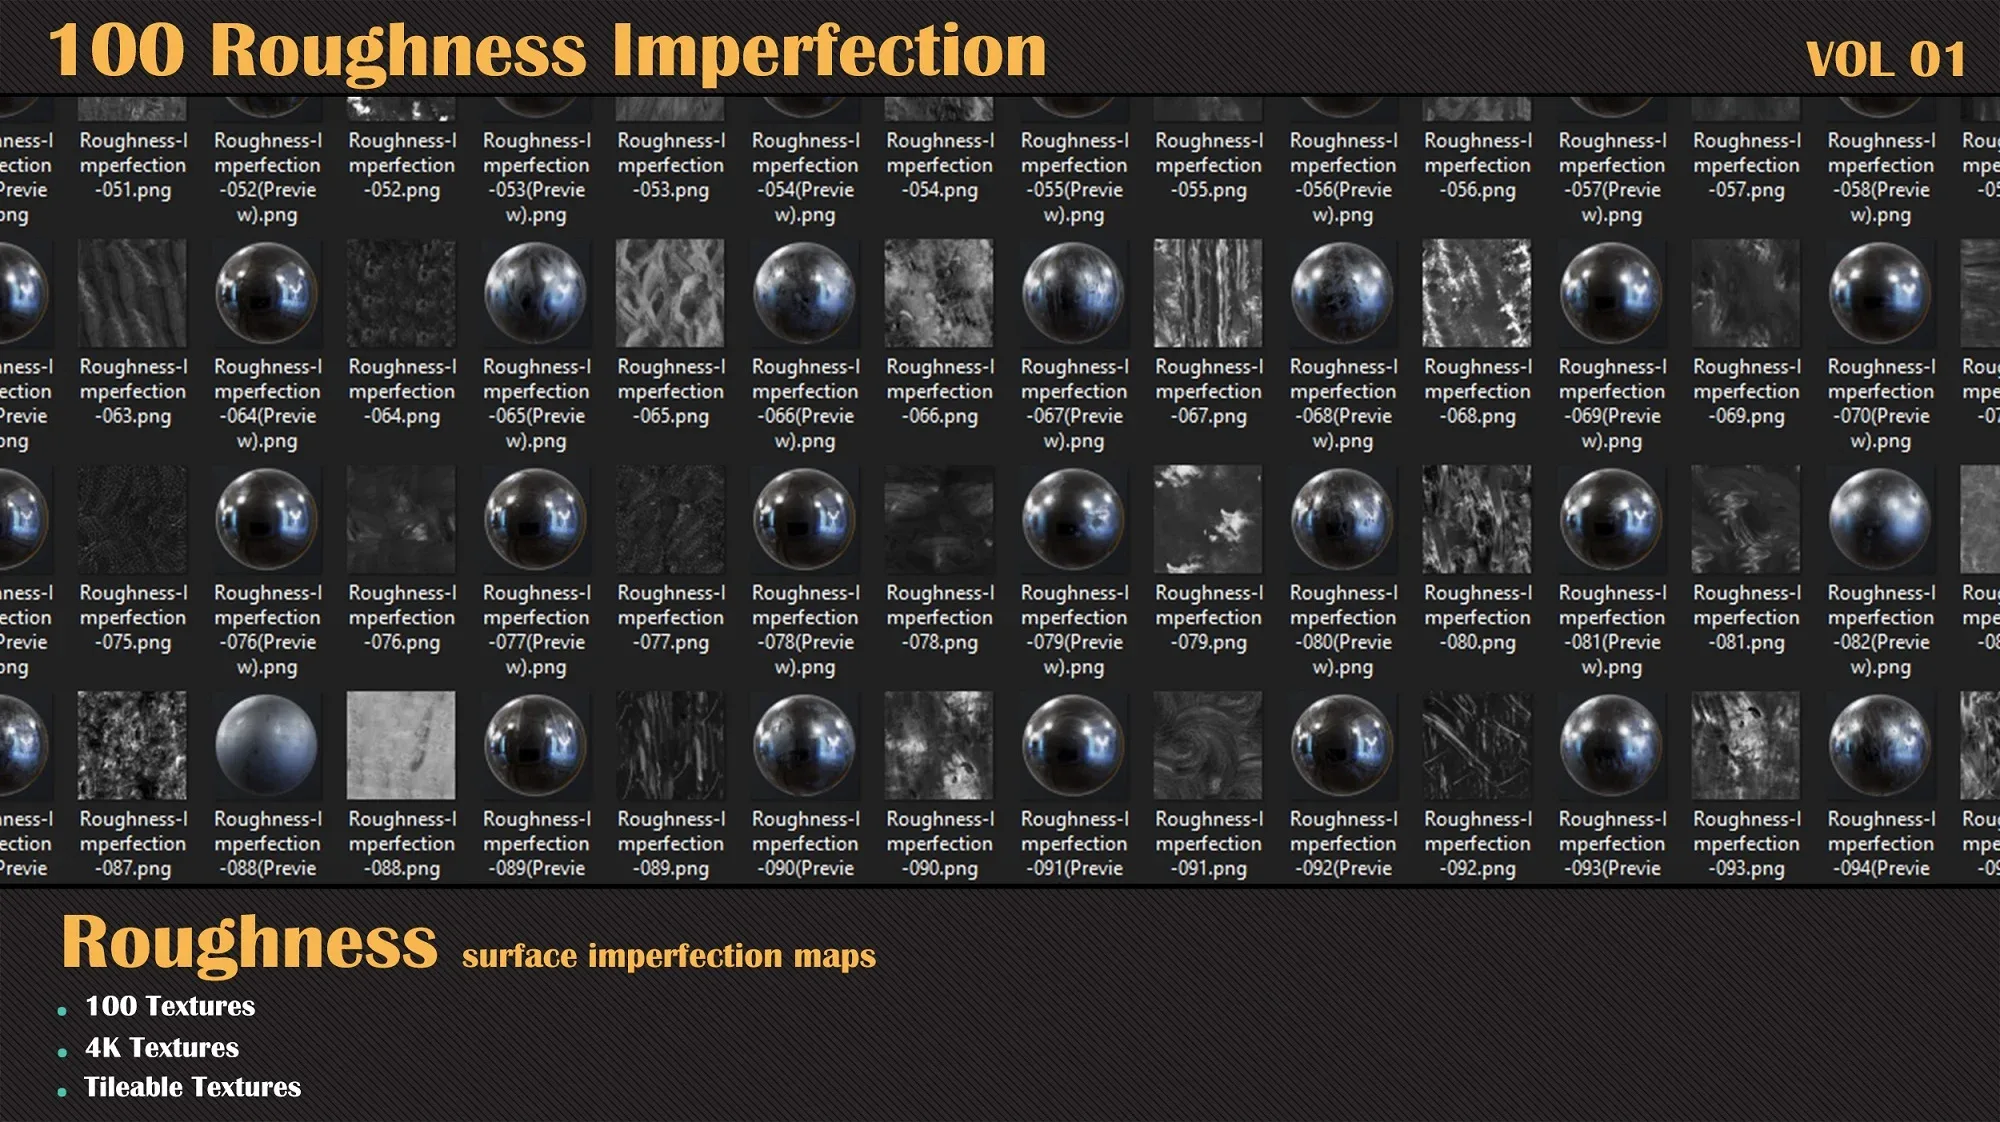 100 Roughness Imperfection - VOL 01